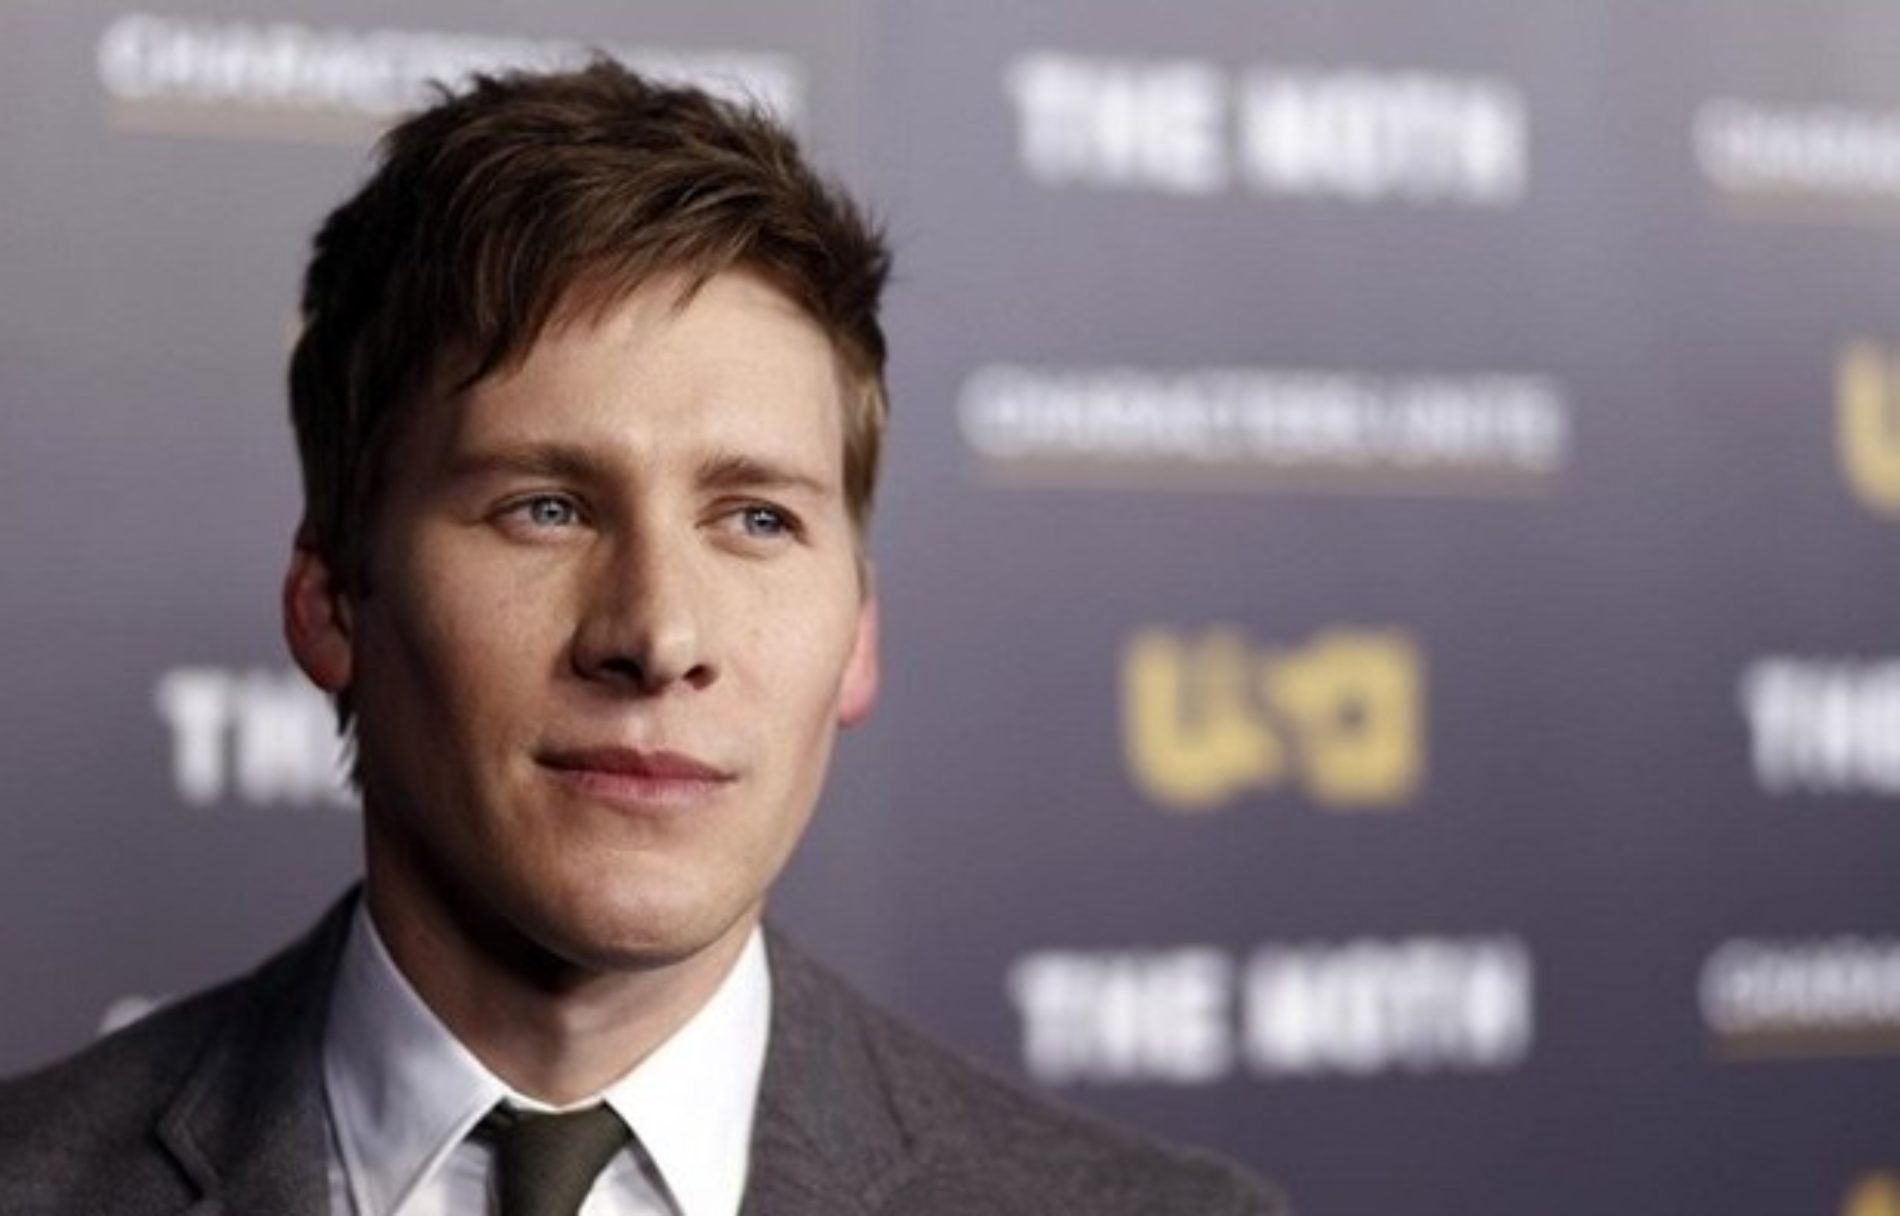 Screenwriter Dustin Lance Black slams A-listers who lie about their sexuality